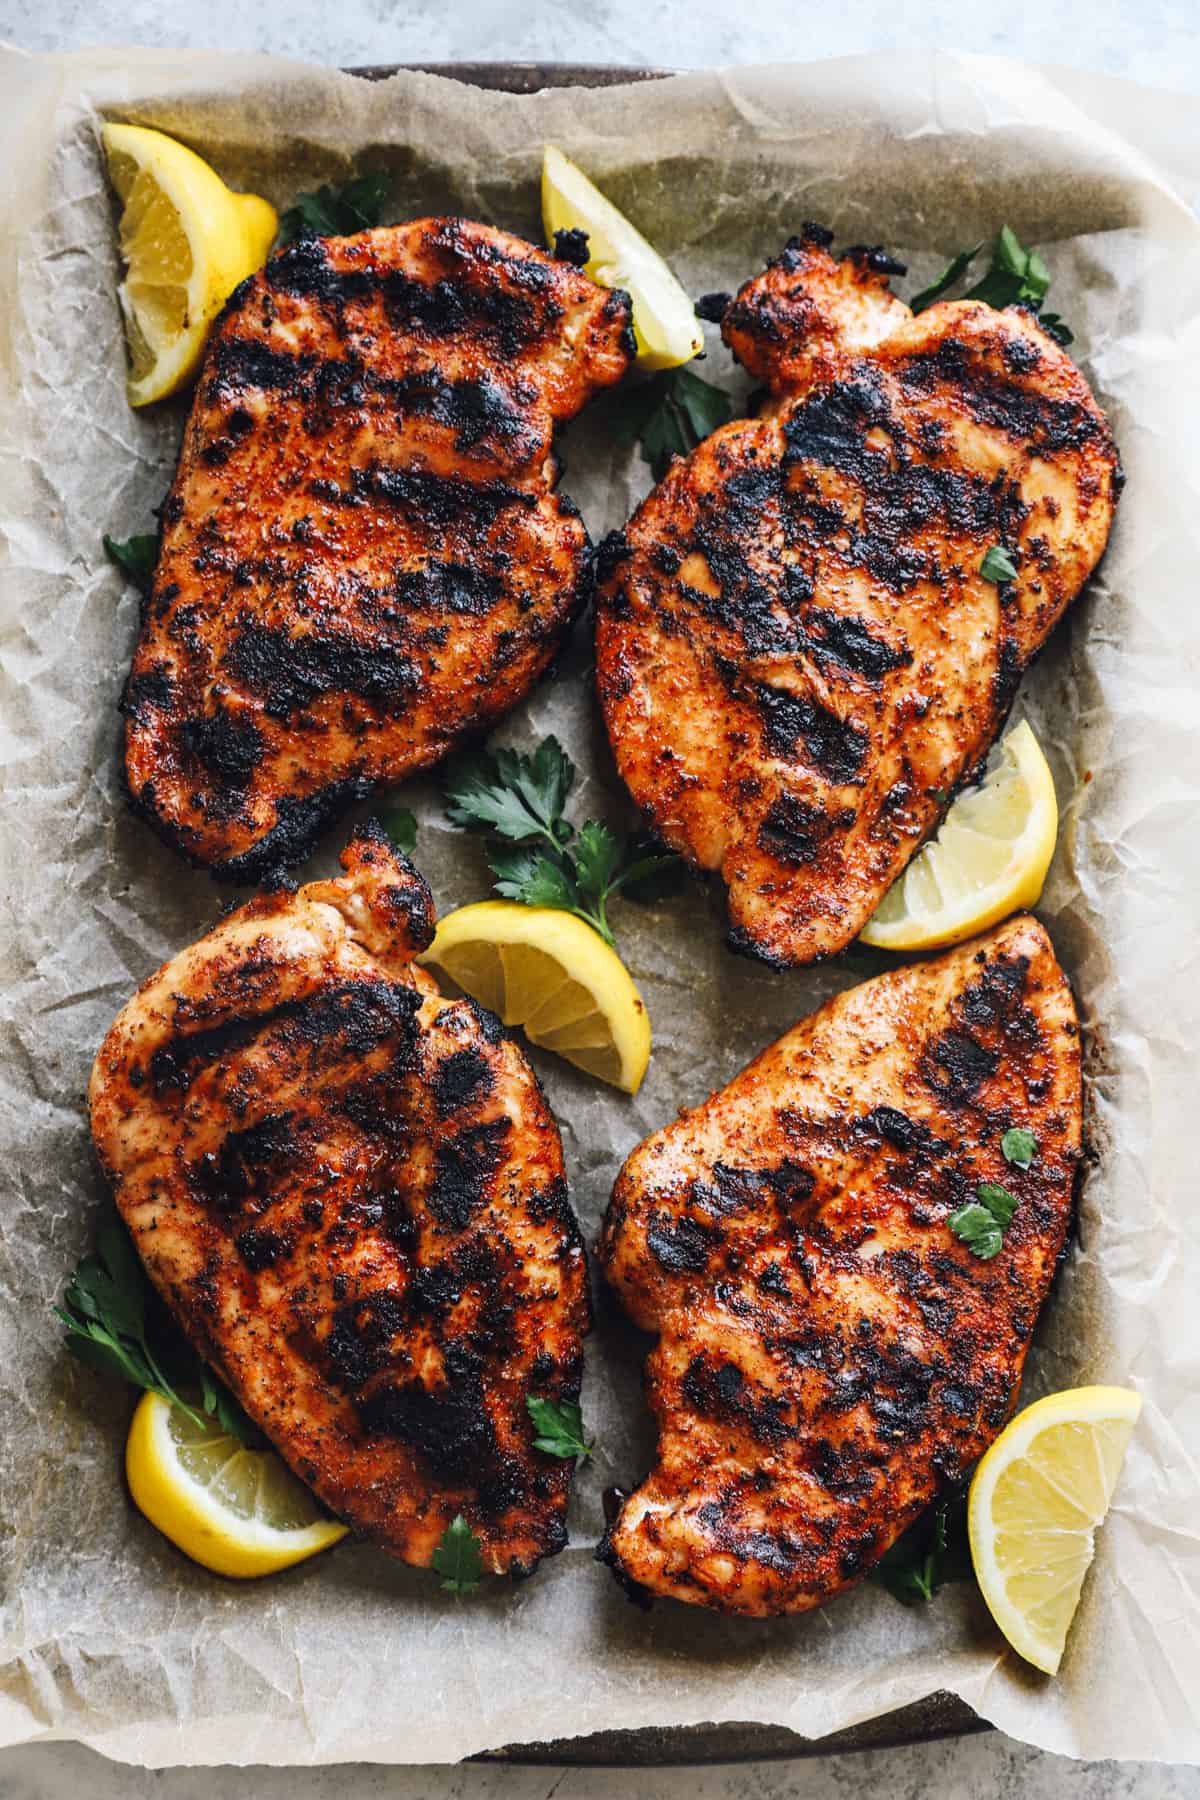 four pieces of grilled chicken breast, laying on a parchment-lined baking tray, surrounded by lemon slices